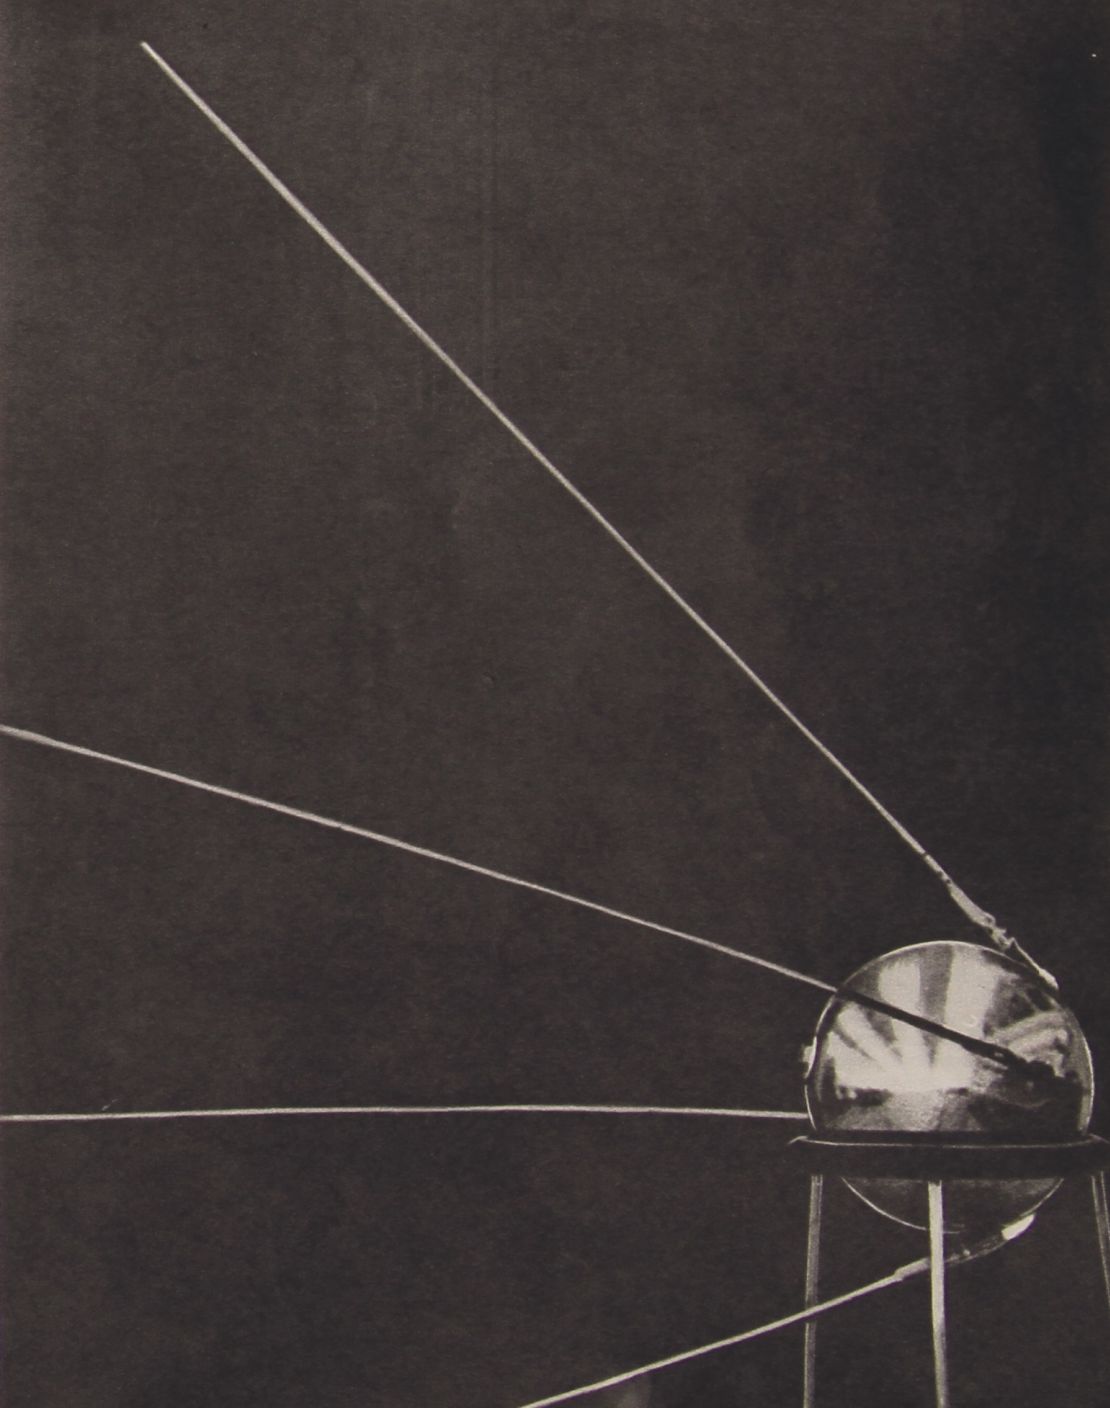 The first ever published photo of Sputnik-1.